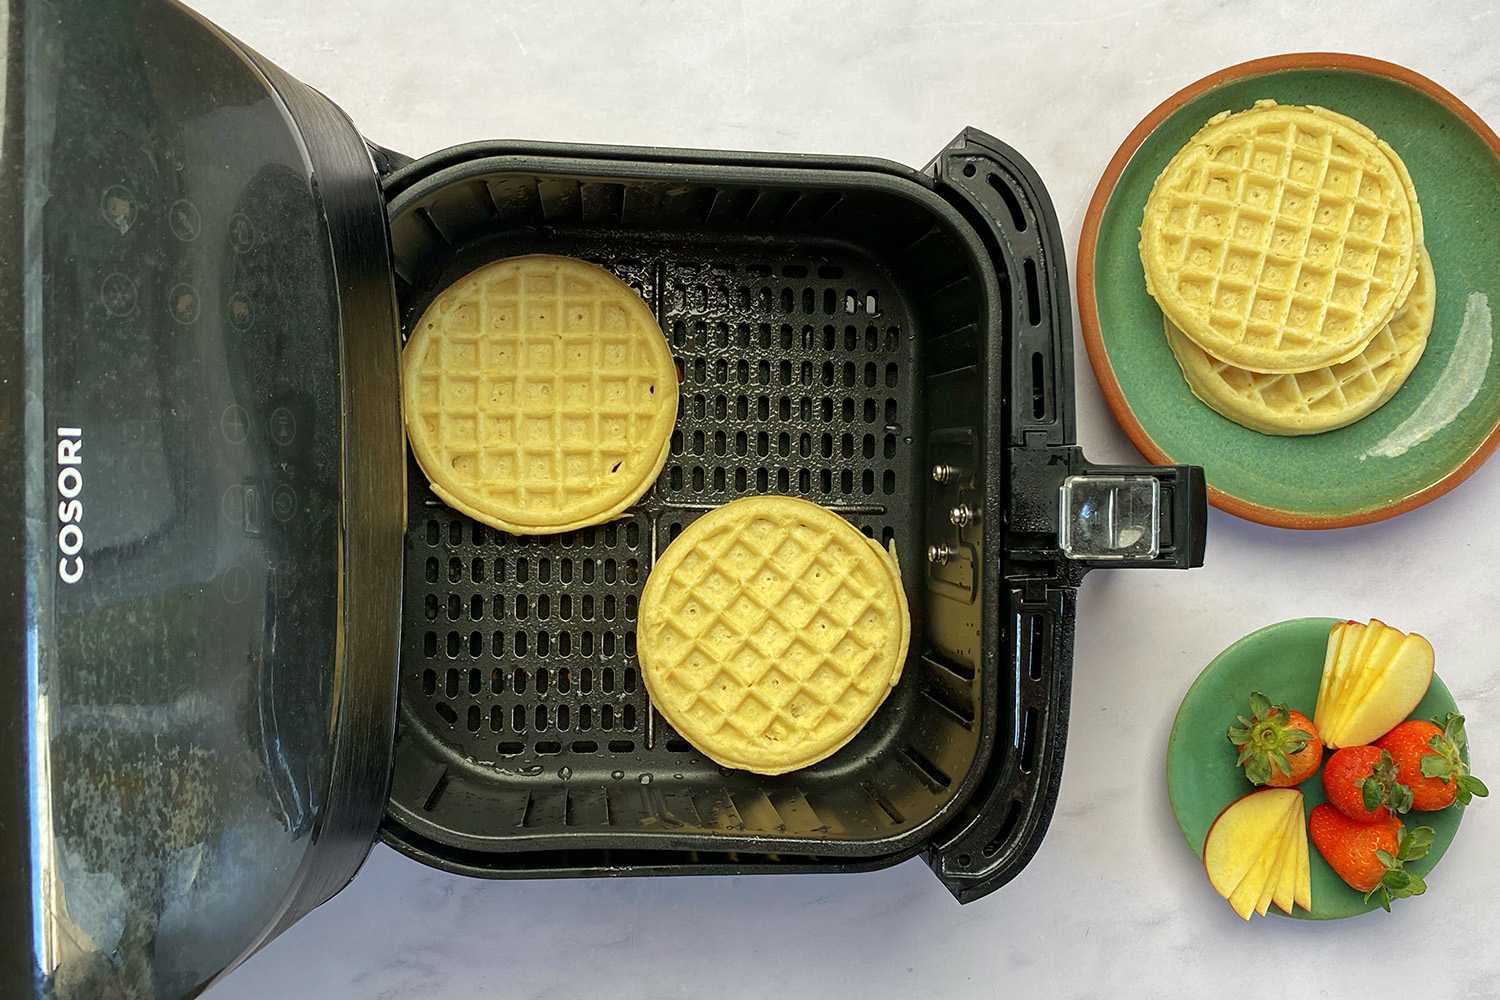 Frozen waffles placed into the air fryer basked prior to cooking.